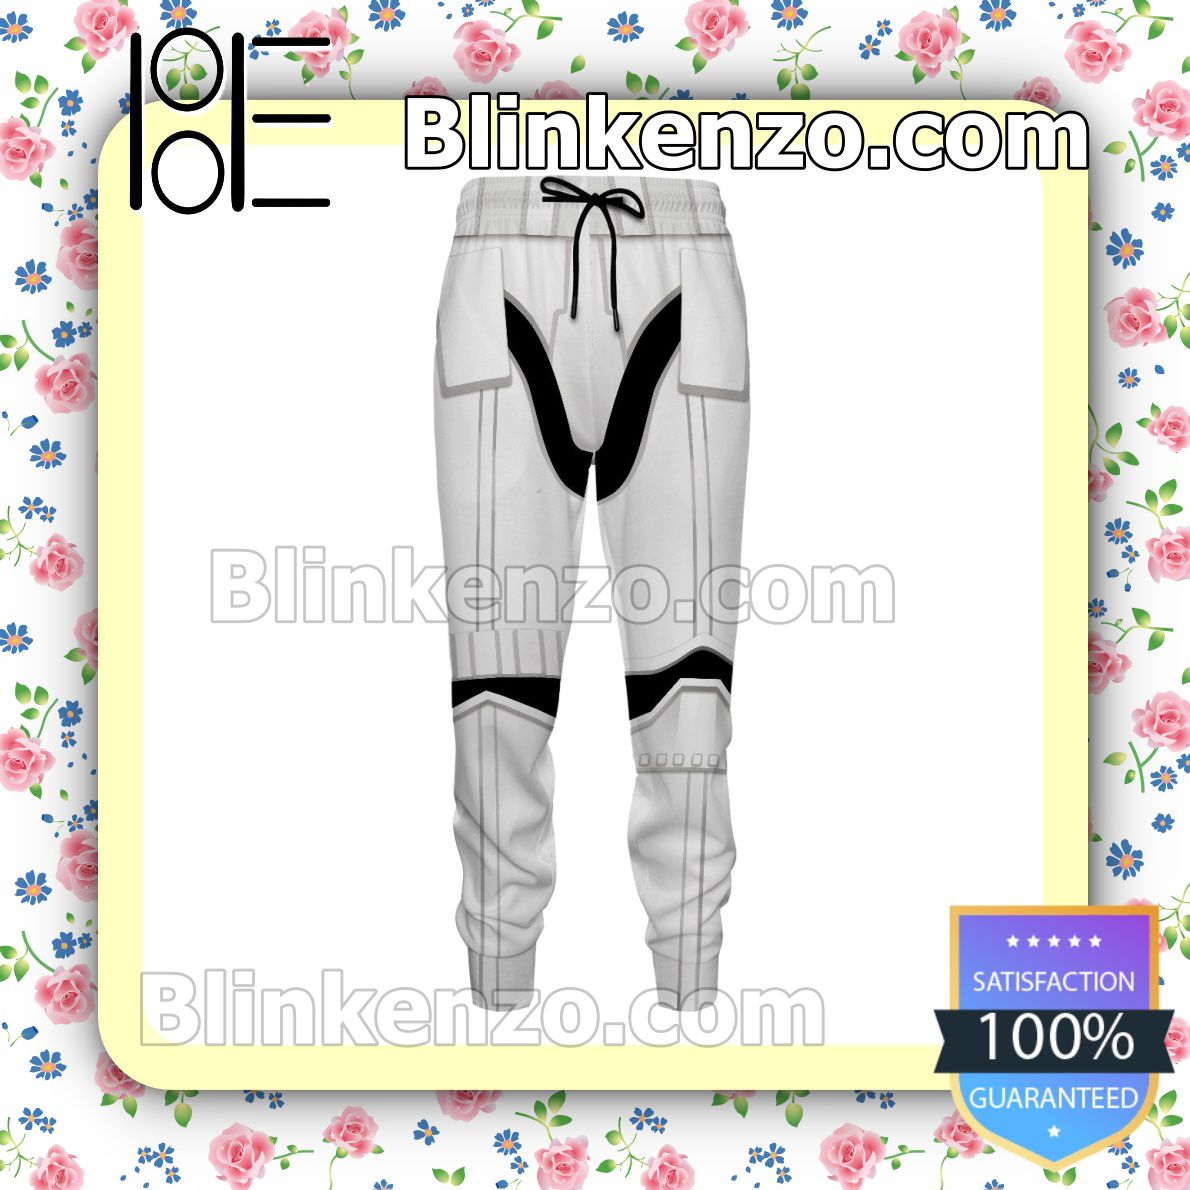 Buy In US Star Wars Stormtrooper Gift For Family Joggers